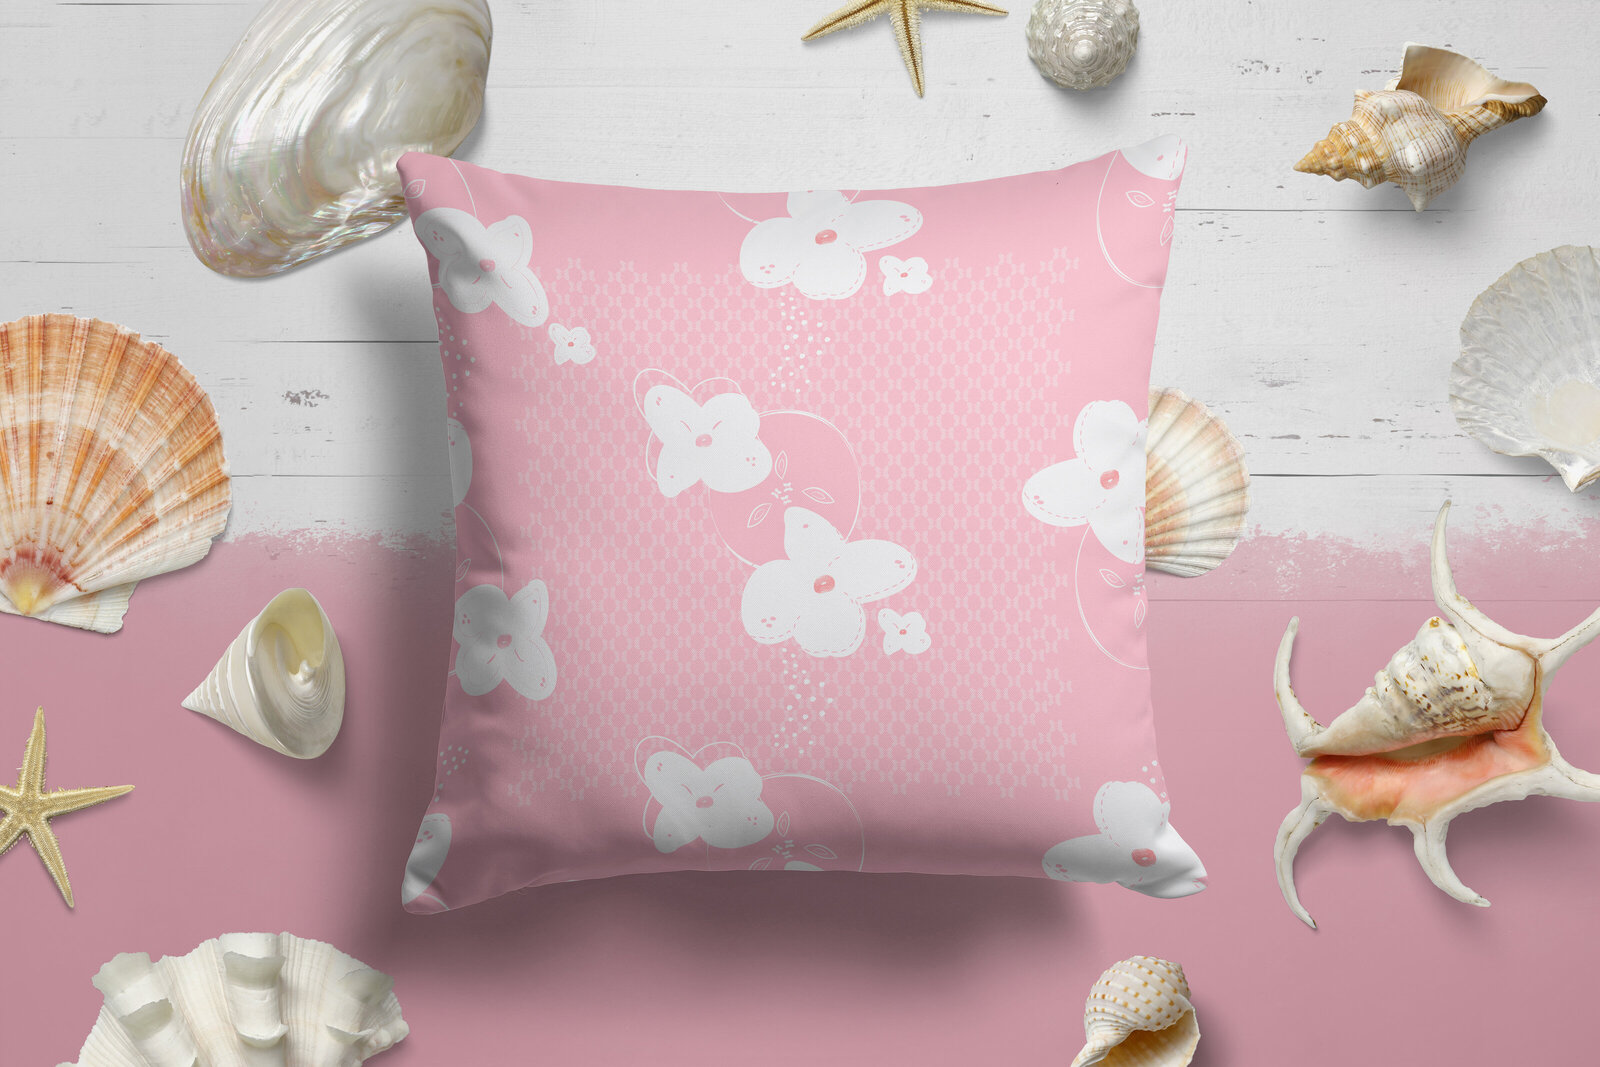 pink and white floral patterned pillow